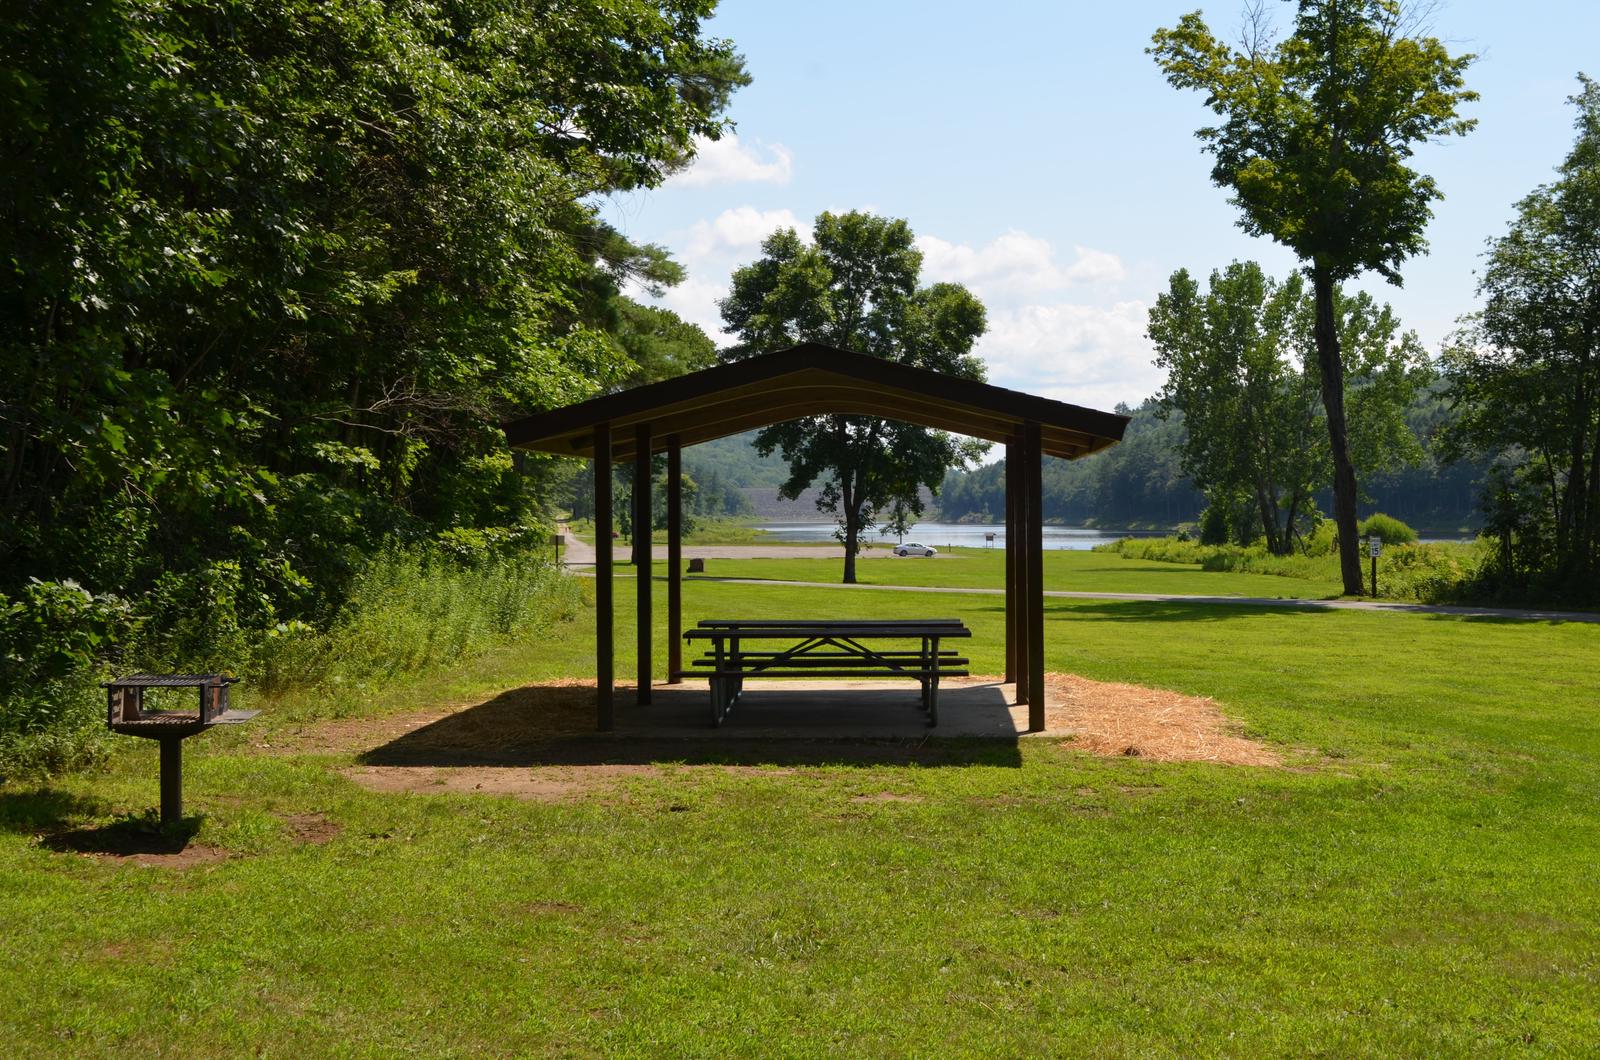 Alder shelter, with picnic tables and grill at Otter Brook Lake, with the lake in the background.Alder Shelter at Otter Brook Lake